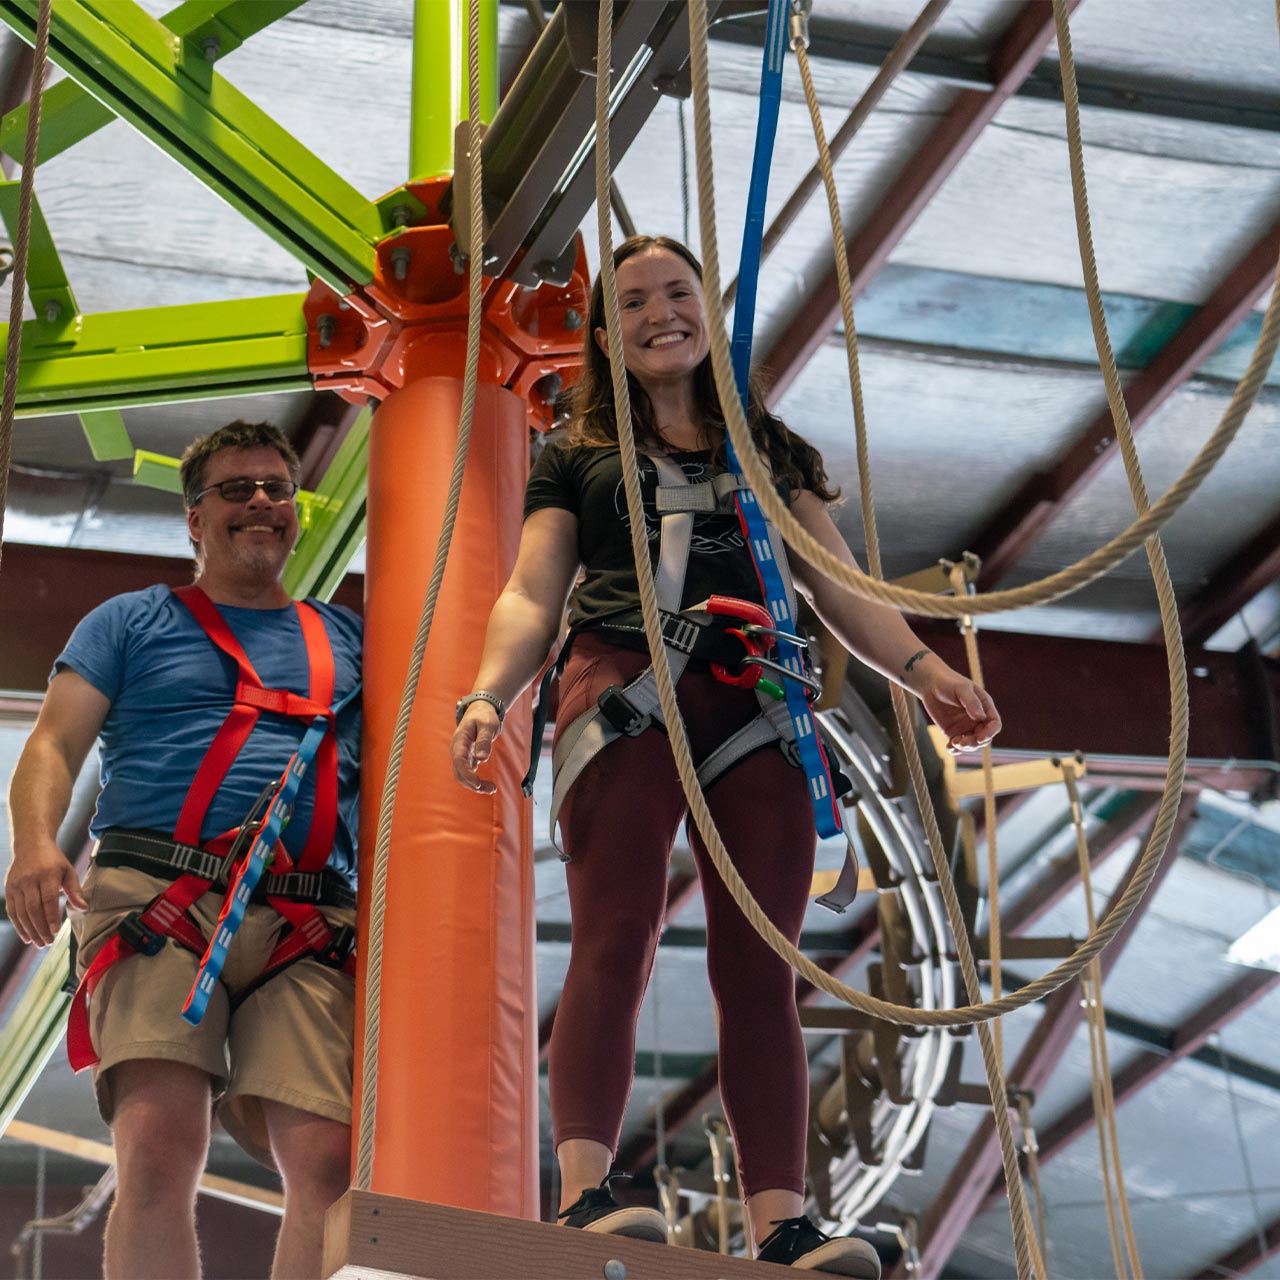 A smiling woman and a grinning man completing the indoor ropes course at Start Skydiving